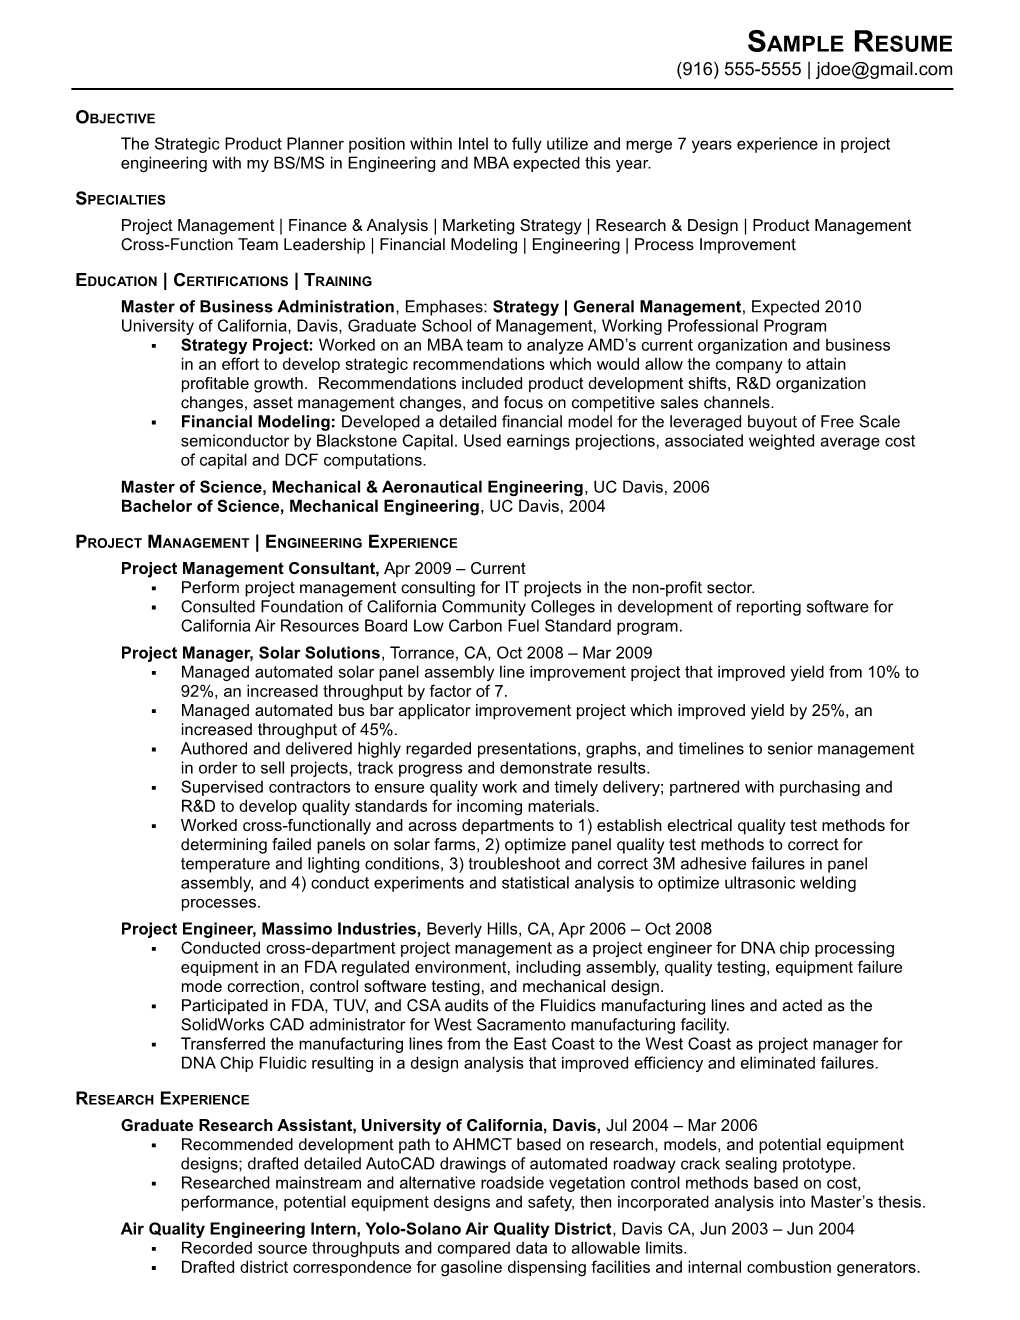 WP Chronological Resume Example - Engineering To ...